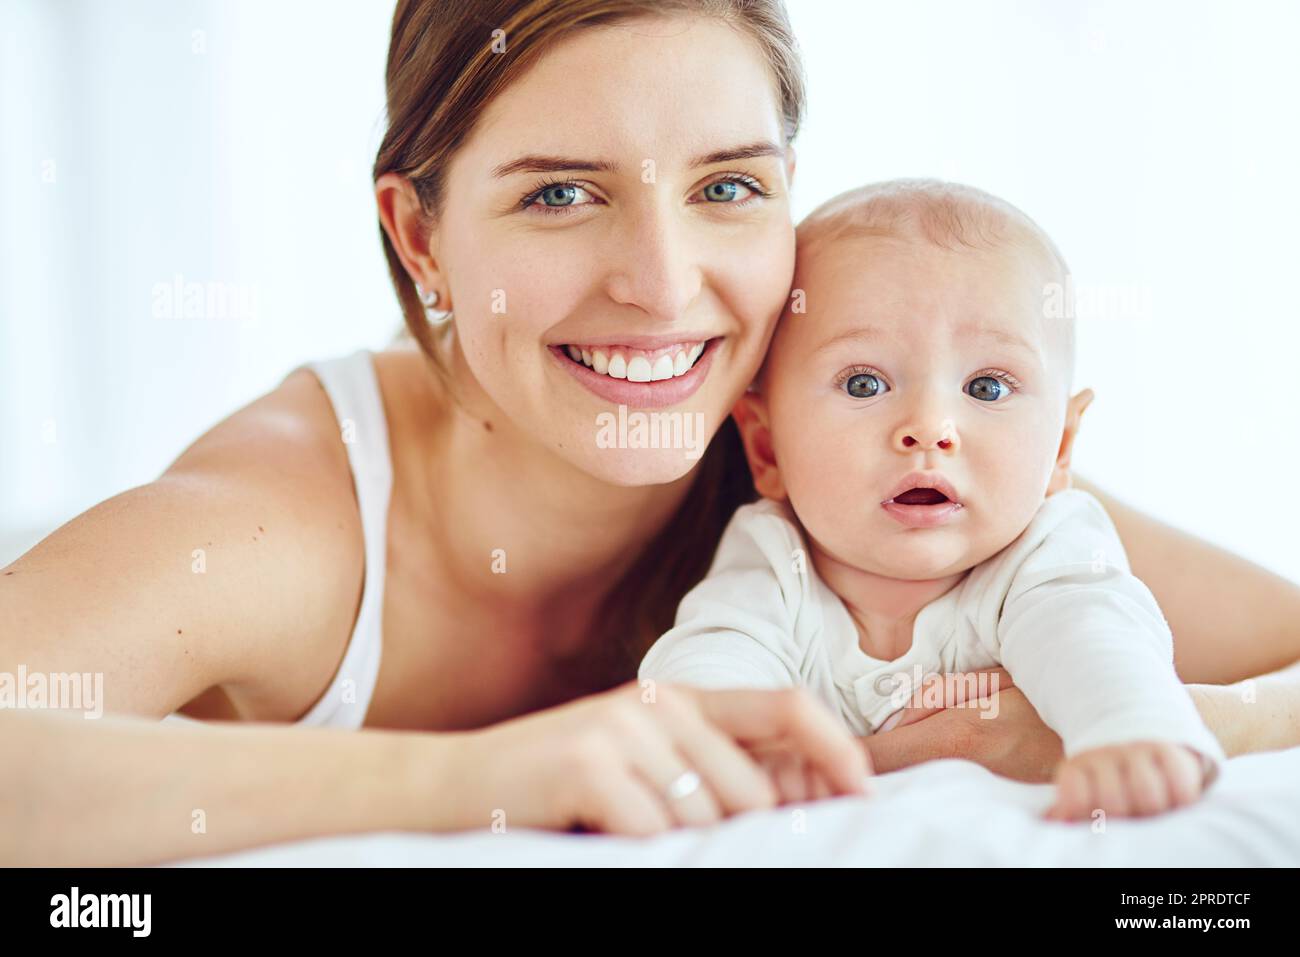 Portrait of happy and loving mother bonding with her cute baby boy at home while enjoying parenthood. Single parent being playful and affectionate, embracing precious moments with her newborn child Stock Photo